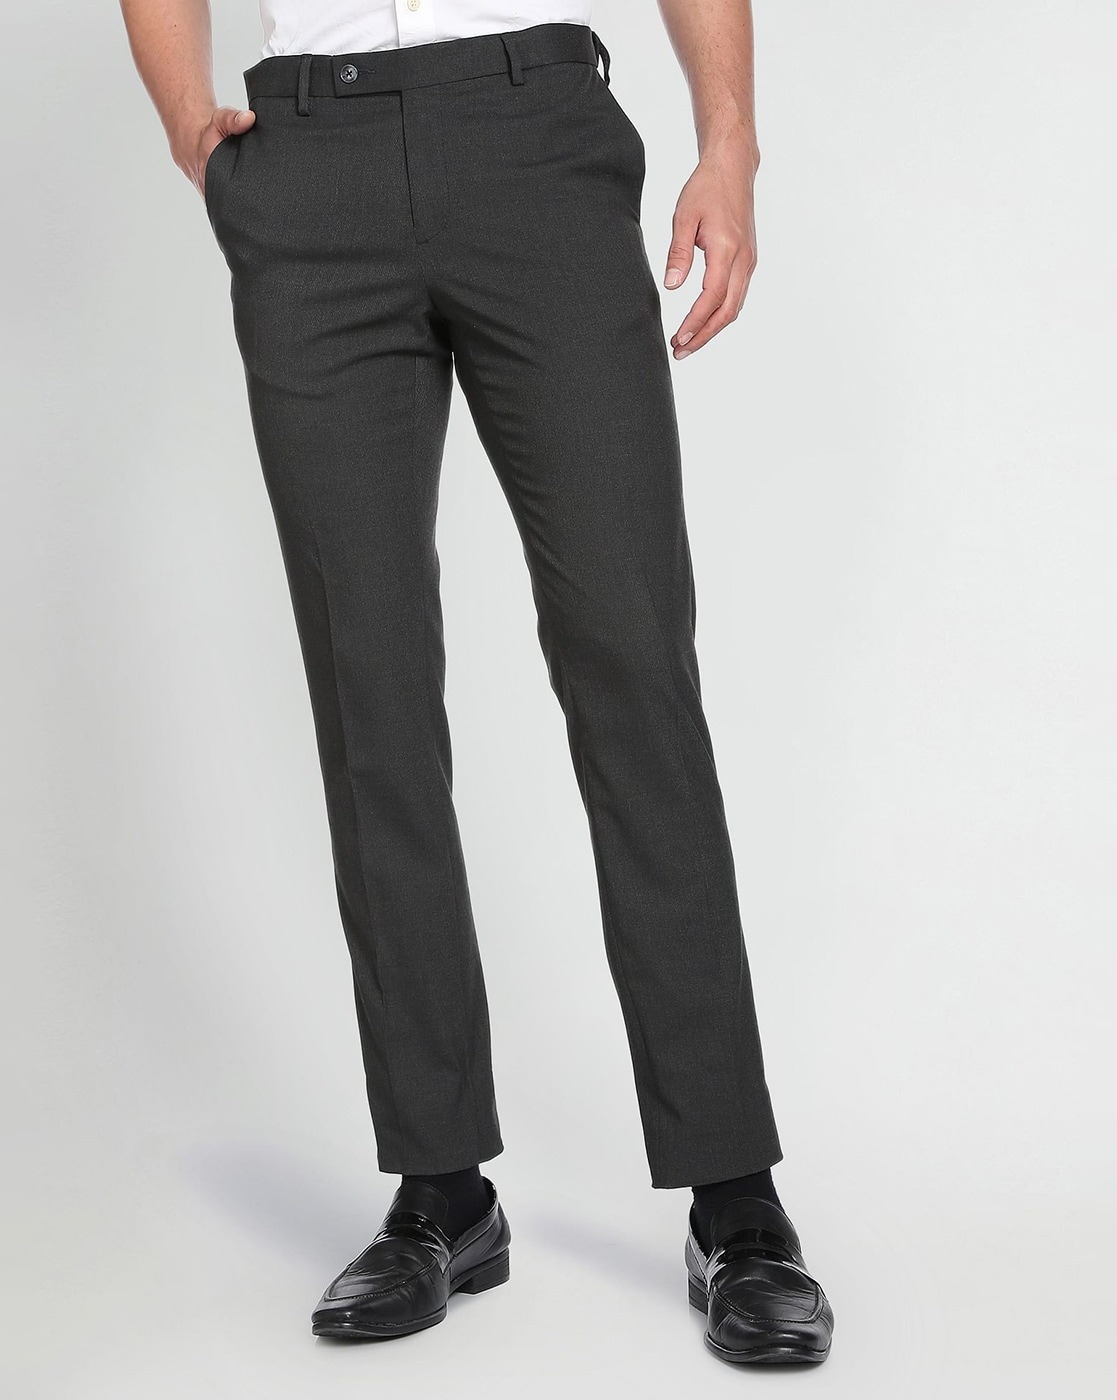 Buy ARROW Black Mens Tapered Fit Woven Trousers | Shoppers Stop